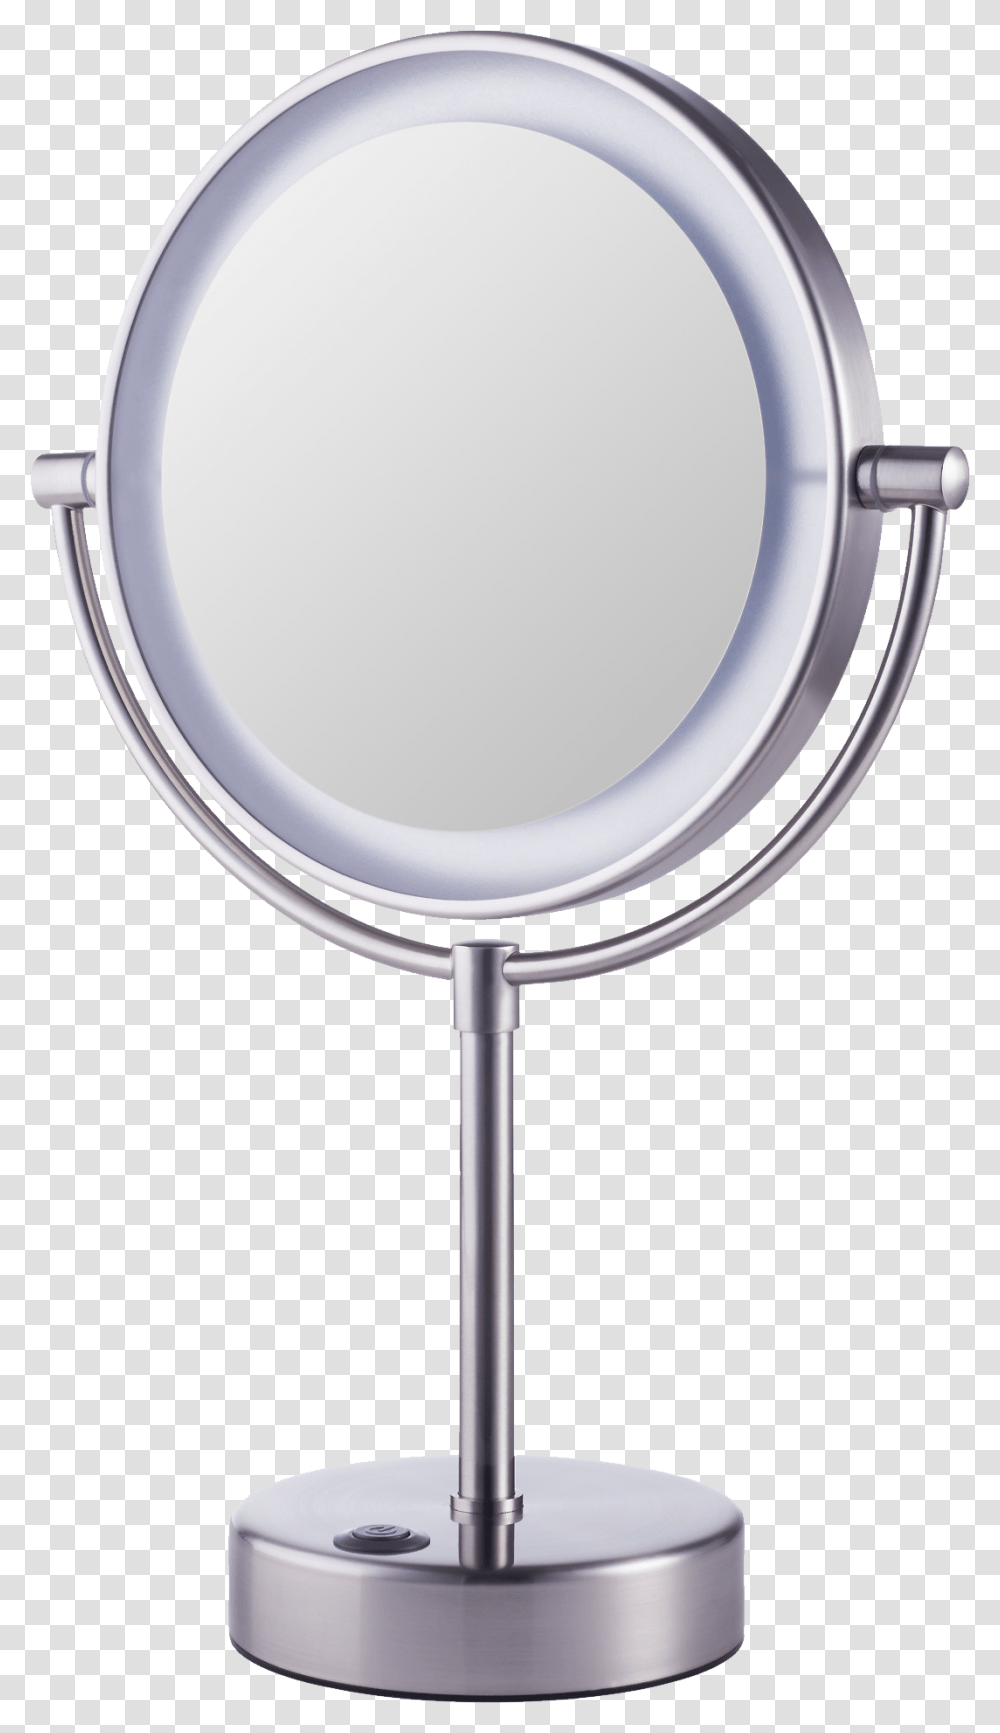 Grab And Download Mirror Image Makeup Mirror Background, Lamp, Sink Faucet, Magnifying, Car Mirror Transparent Png